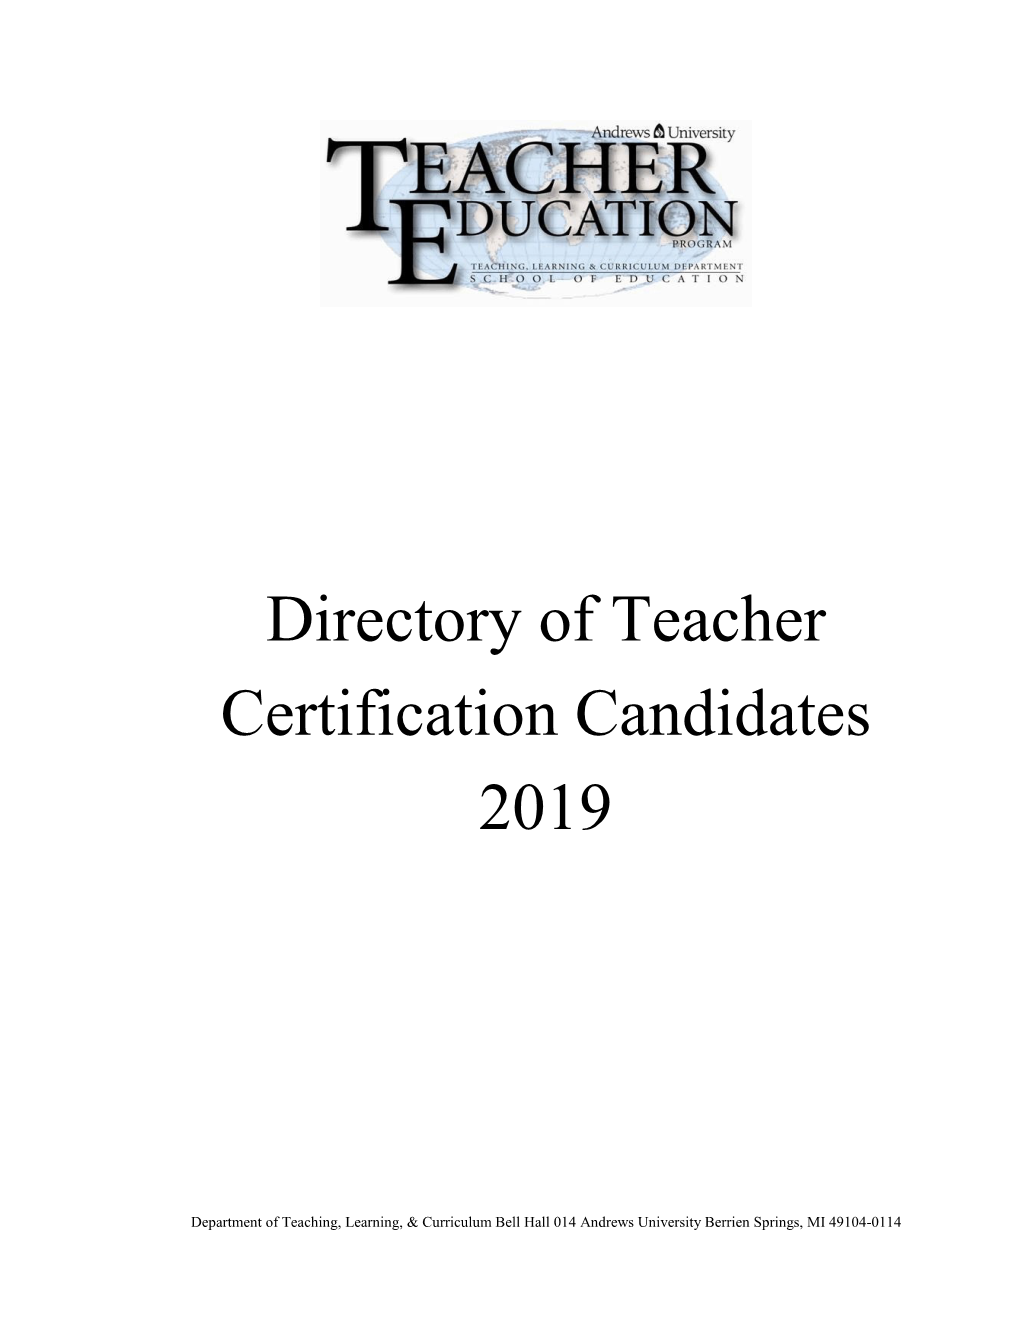 Directory of Teacher Certification Candidates 2019